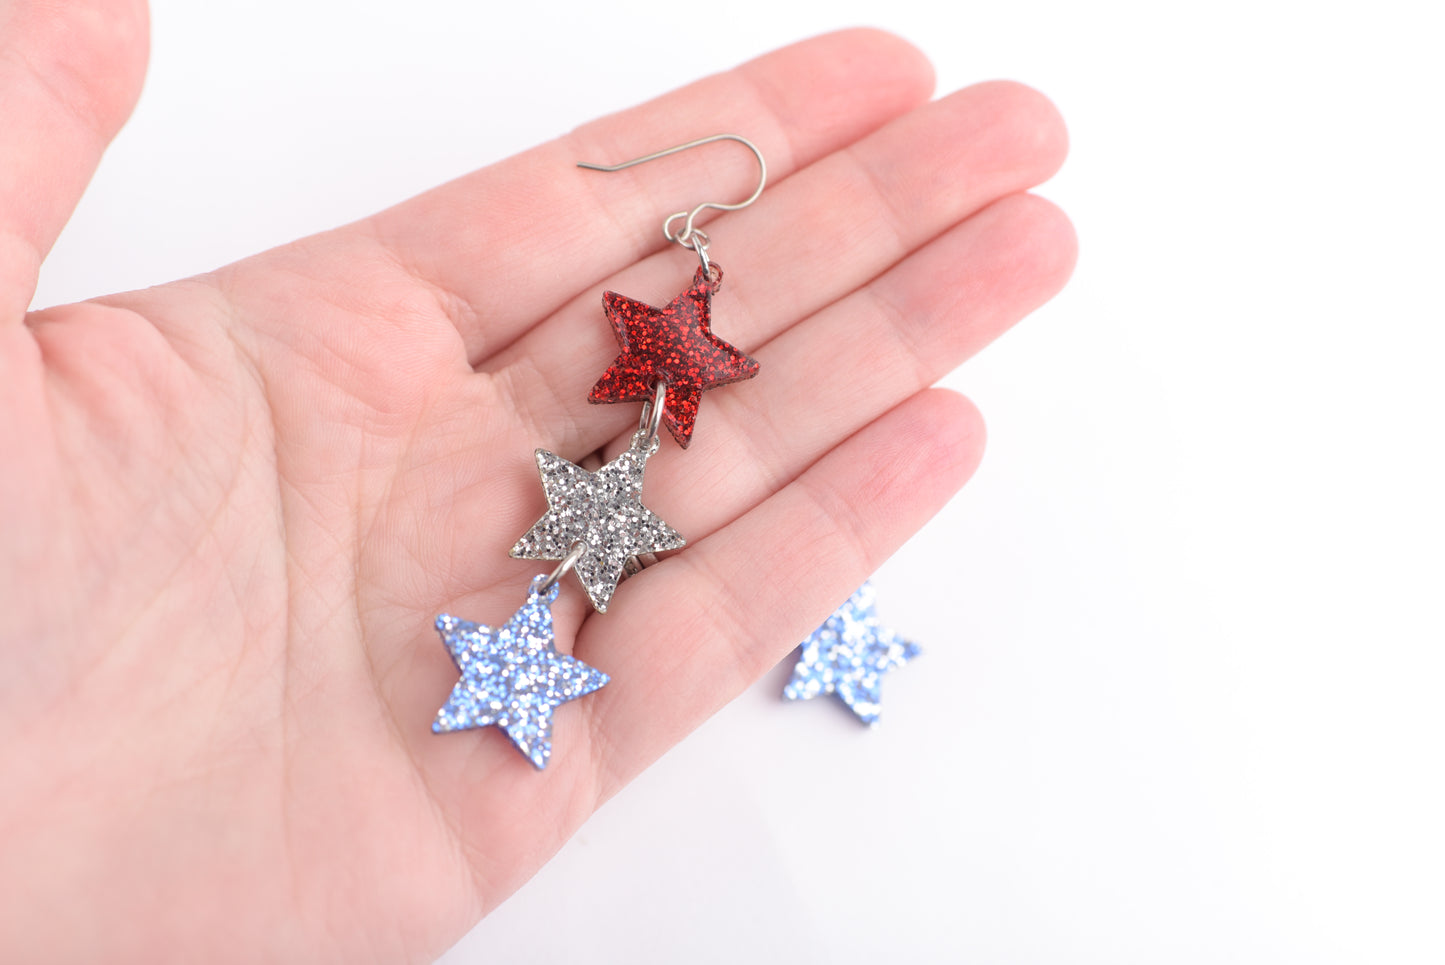 Red, White, and Blue Glitter Star Dangle Earrings with Titanium Ear Wires